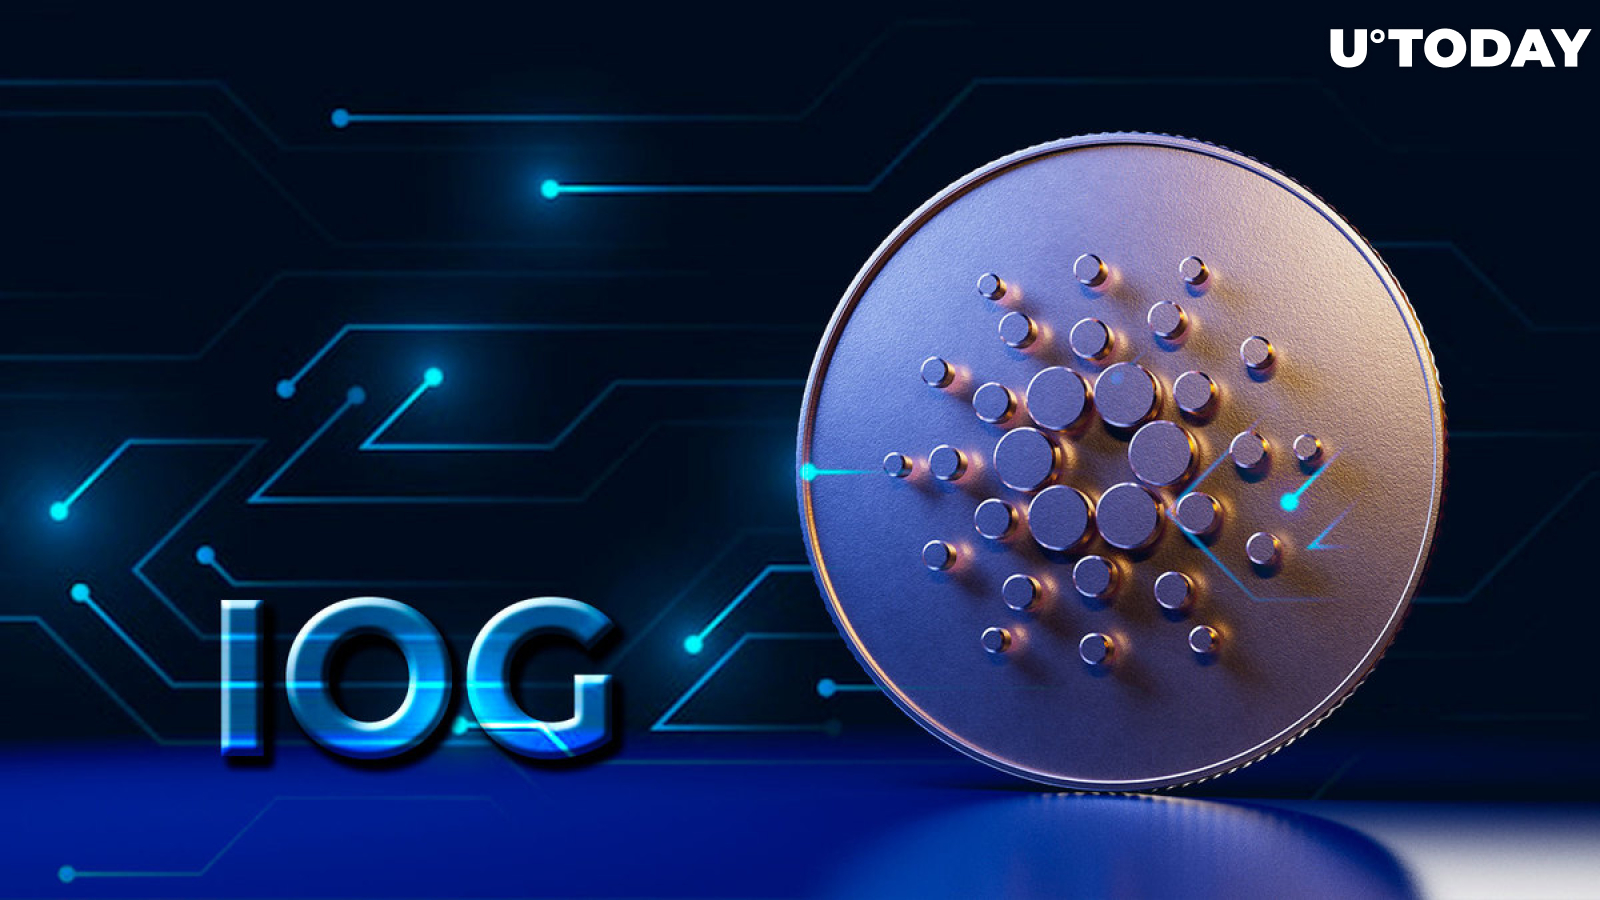 Cardano's IOG Gives Its Latest Update on State of Things for Vasil